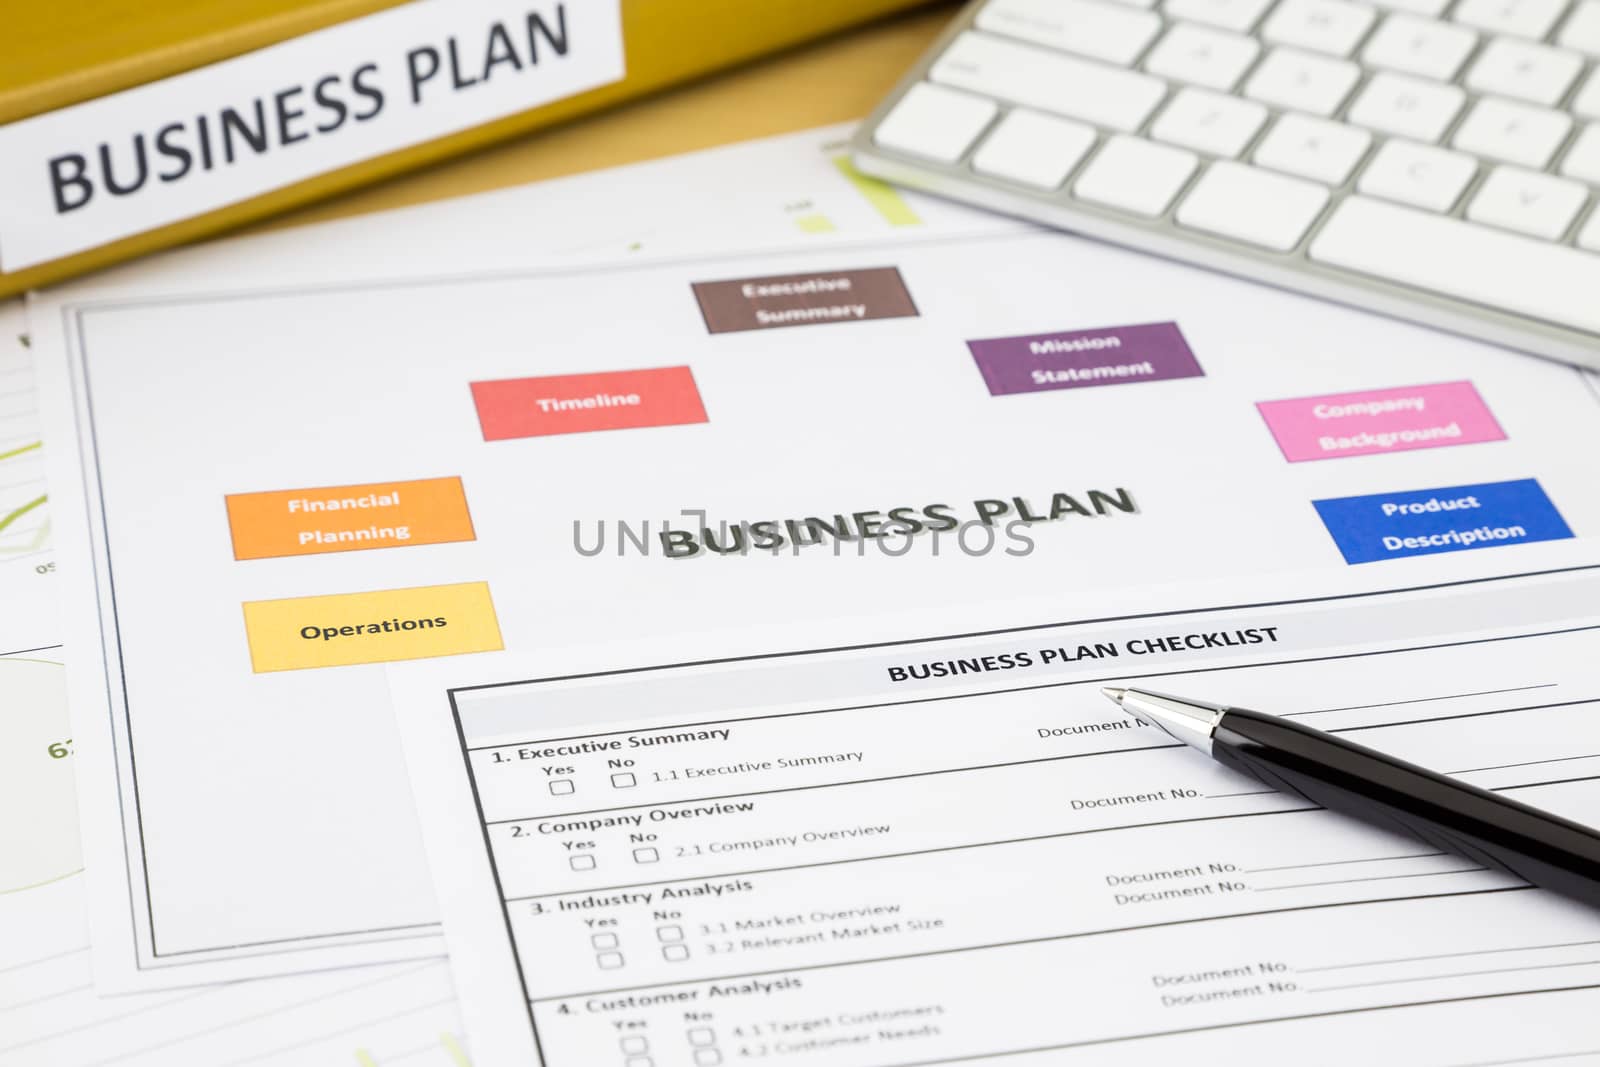 Business plan checklist and paperwork place on office table